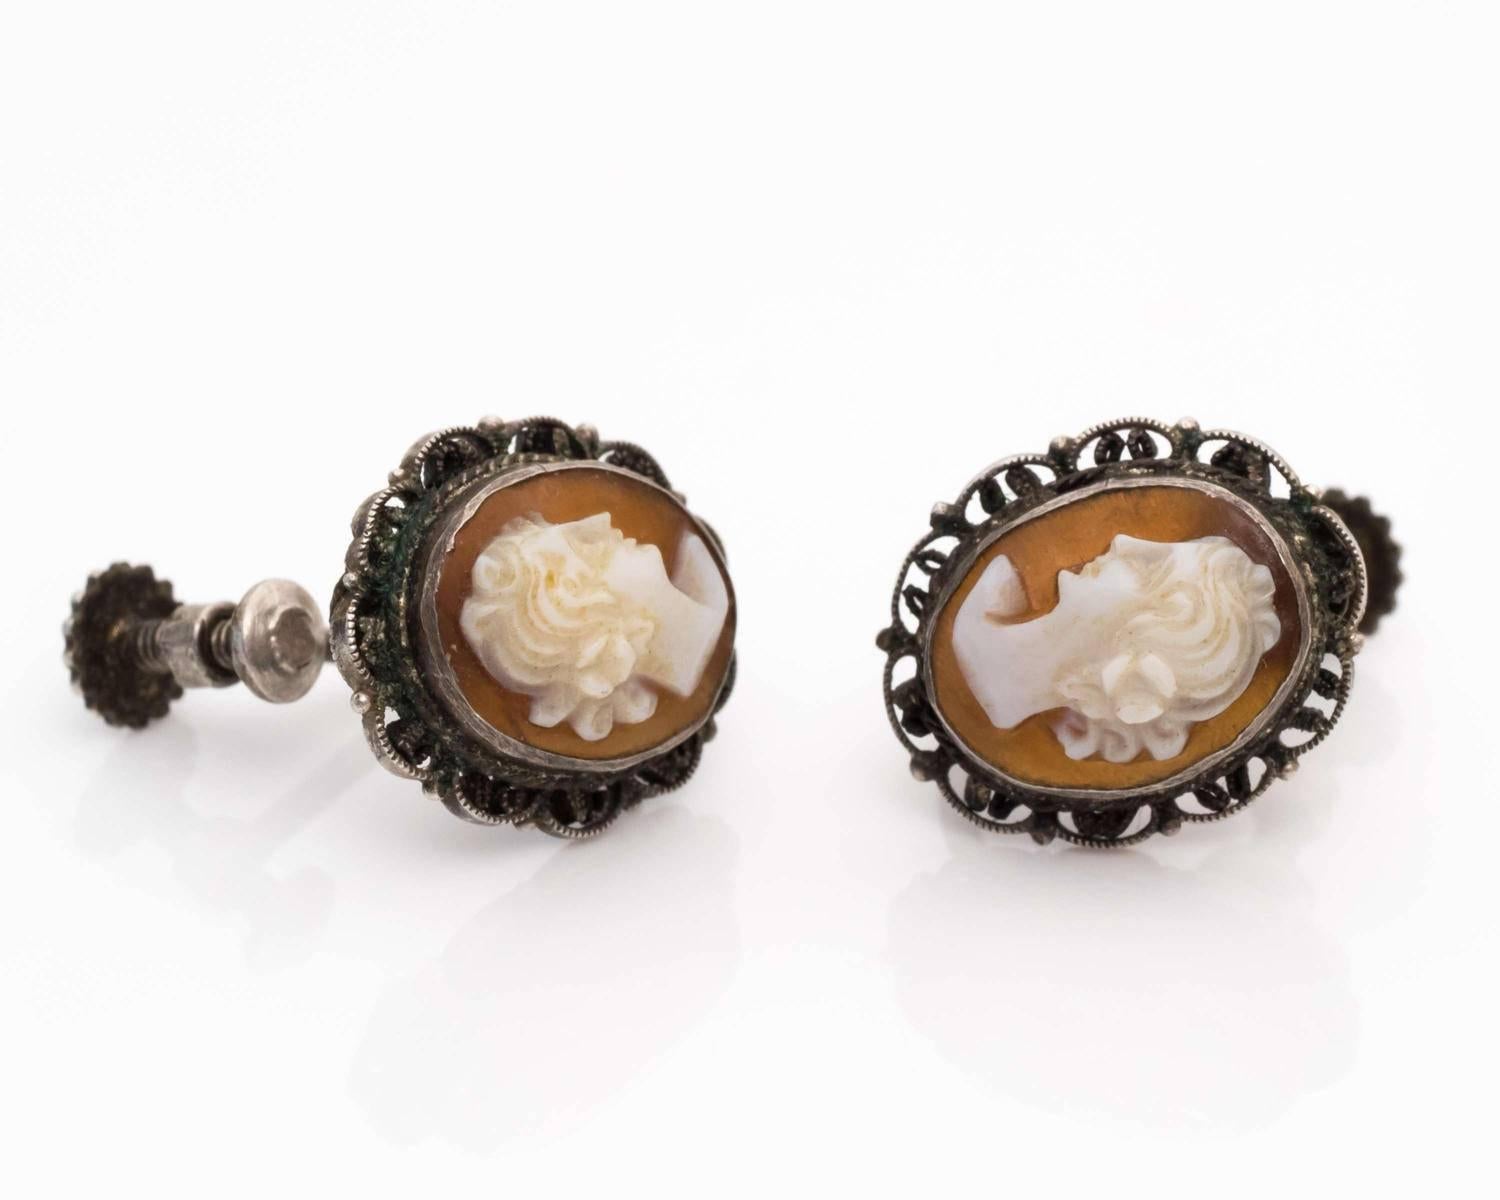 These unique cameo earrings from 1870s are exceptionally beautiful! The intricate hand-carved cameo relief is lovely and elegant. The relief displays a visage of a woman in white with the classic pinkish shell backdrop. The detailed etchings show